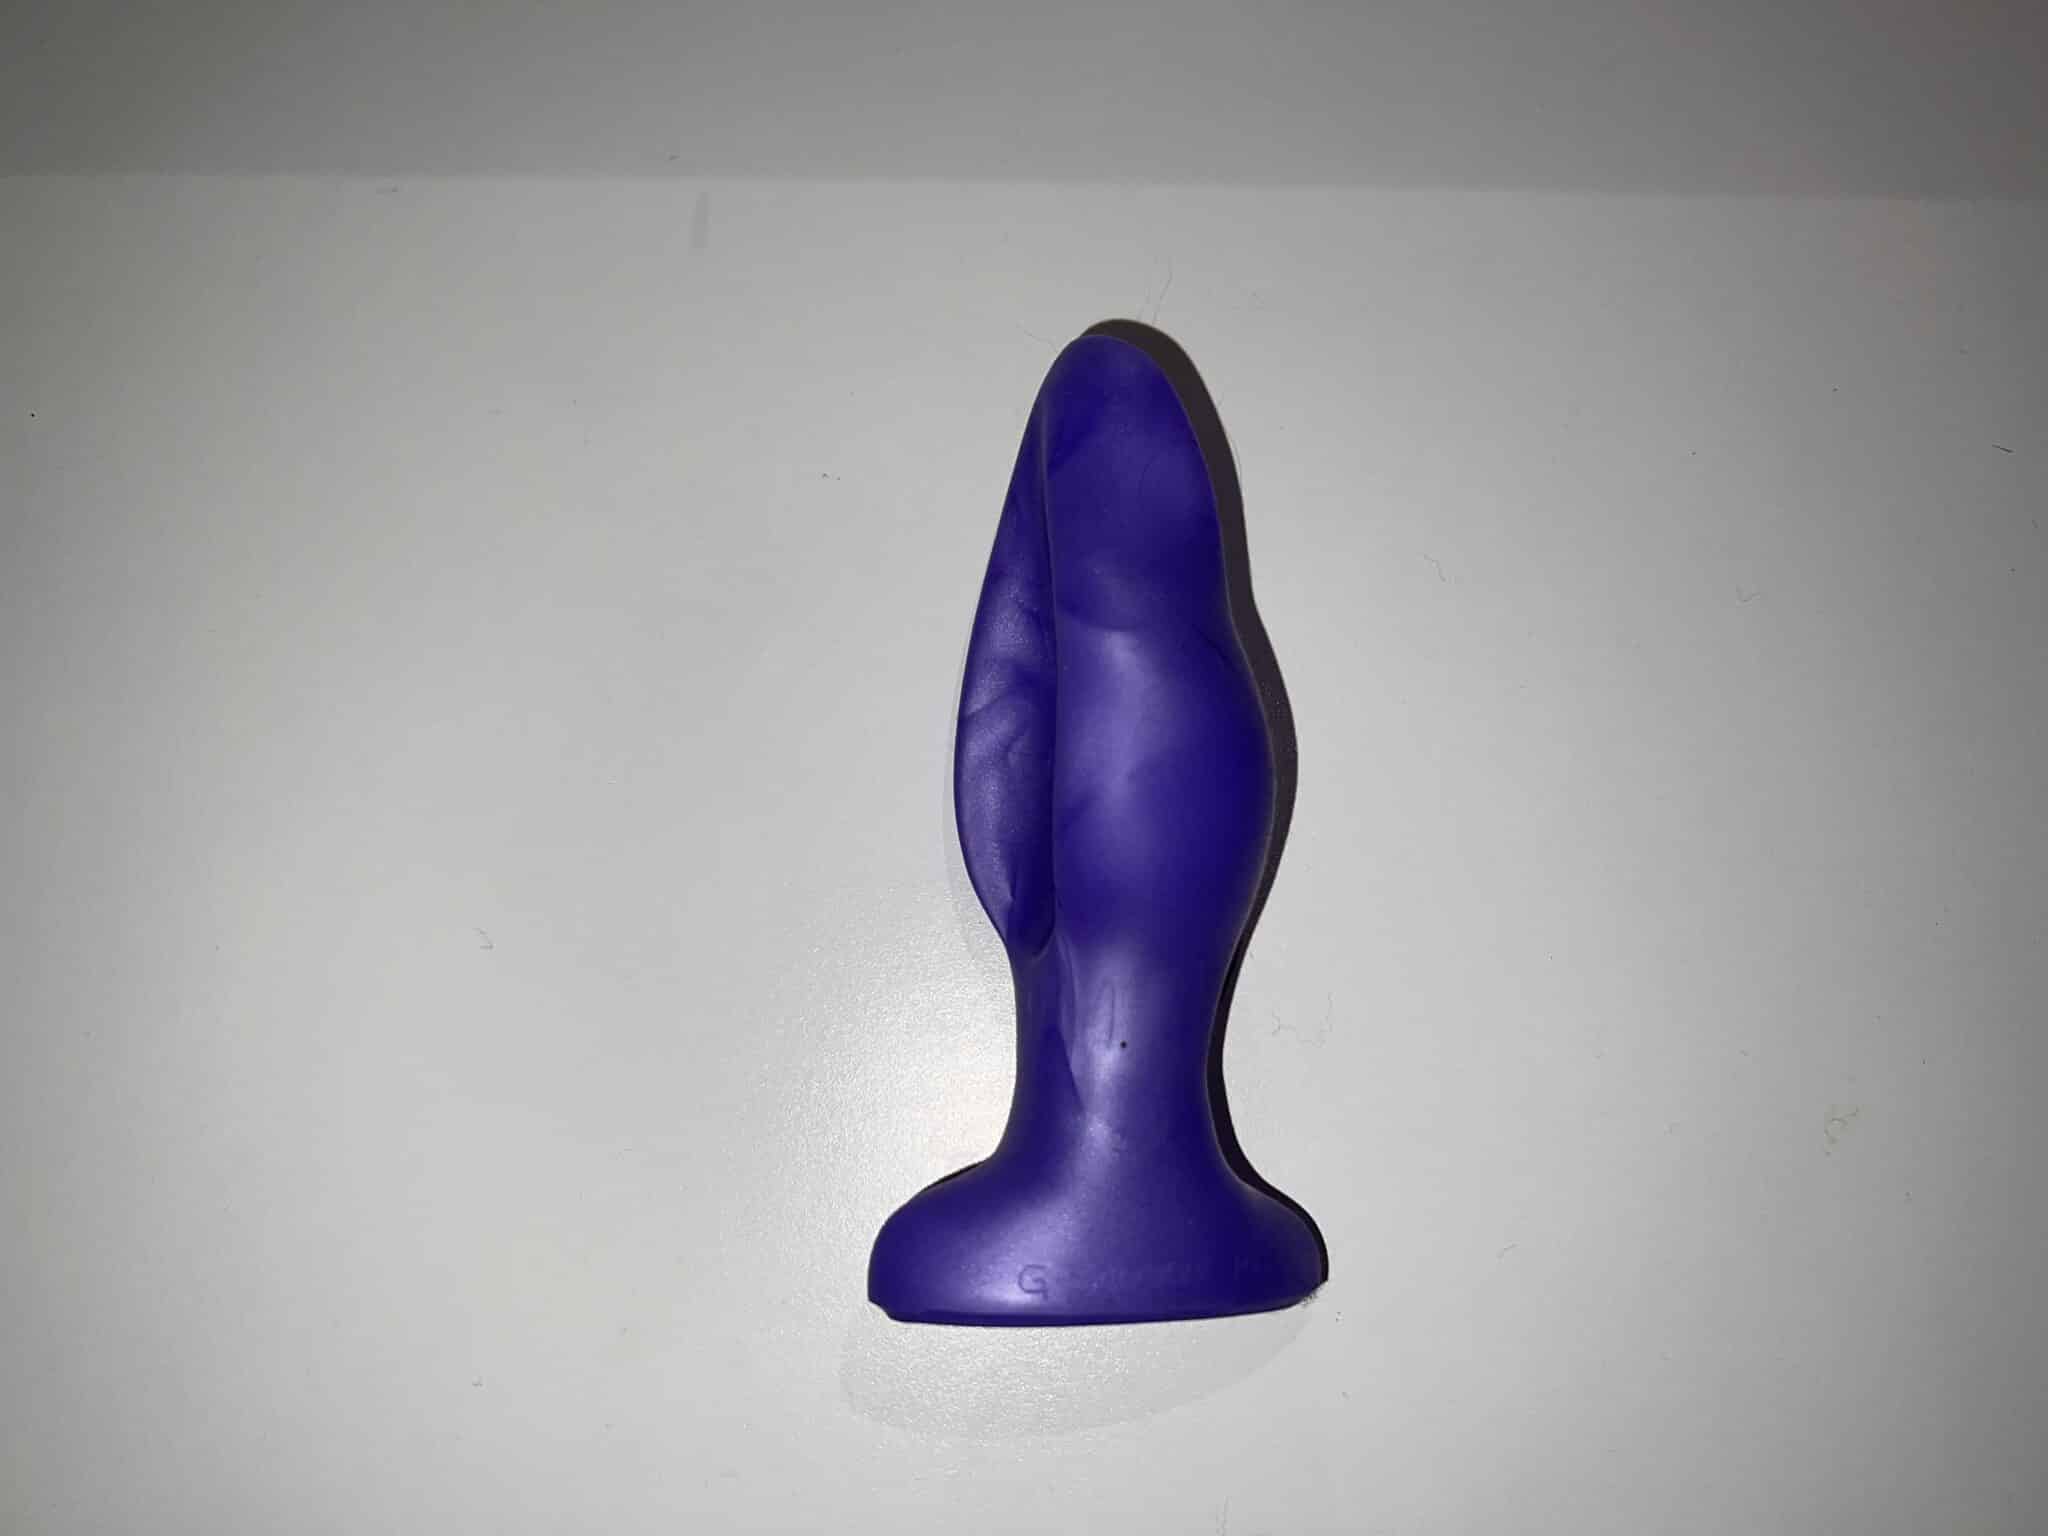 SquarePegToys G Squeeze Vaginal Plug Understanding the Materials and Care for the SquarePegToys G Squeeze Vaginal Plug